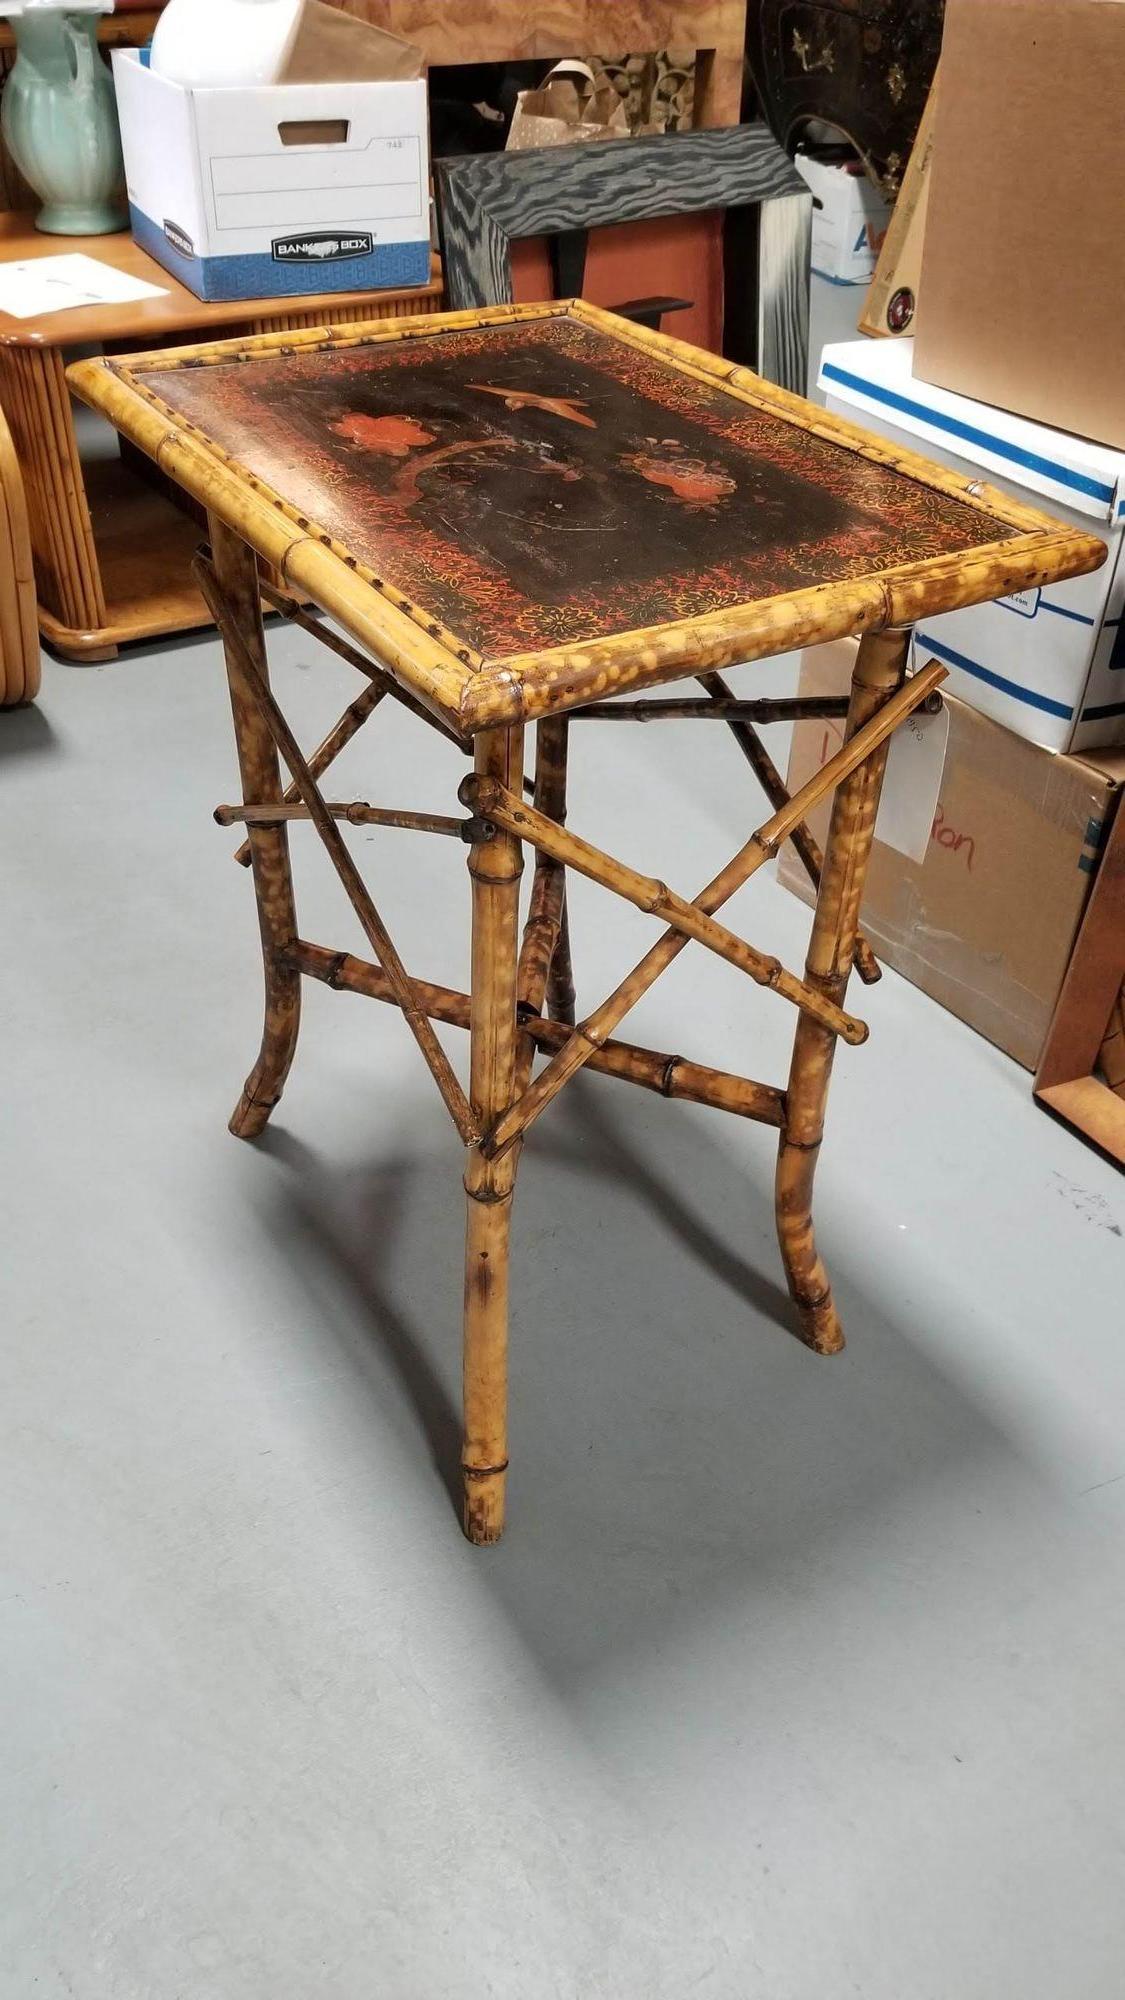 Turn of the 20th Century Aesthetic Movement tiger bamboo pedestal side table with a hand-painted scenic top portraying a bird with floral scenery, a large square top, and crop 